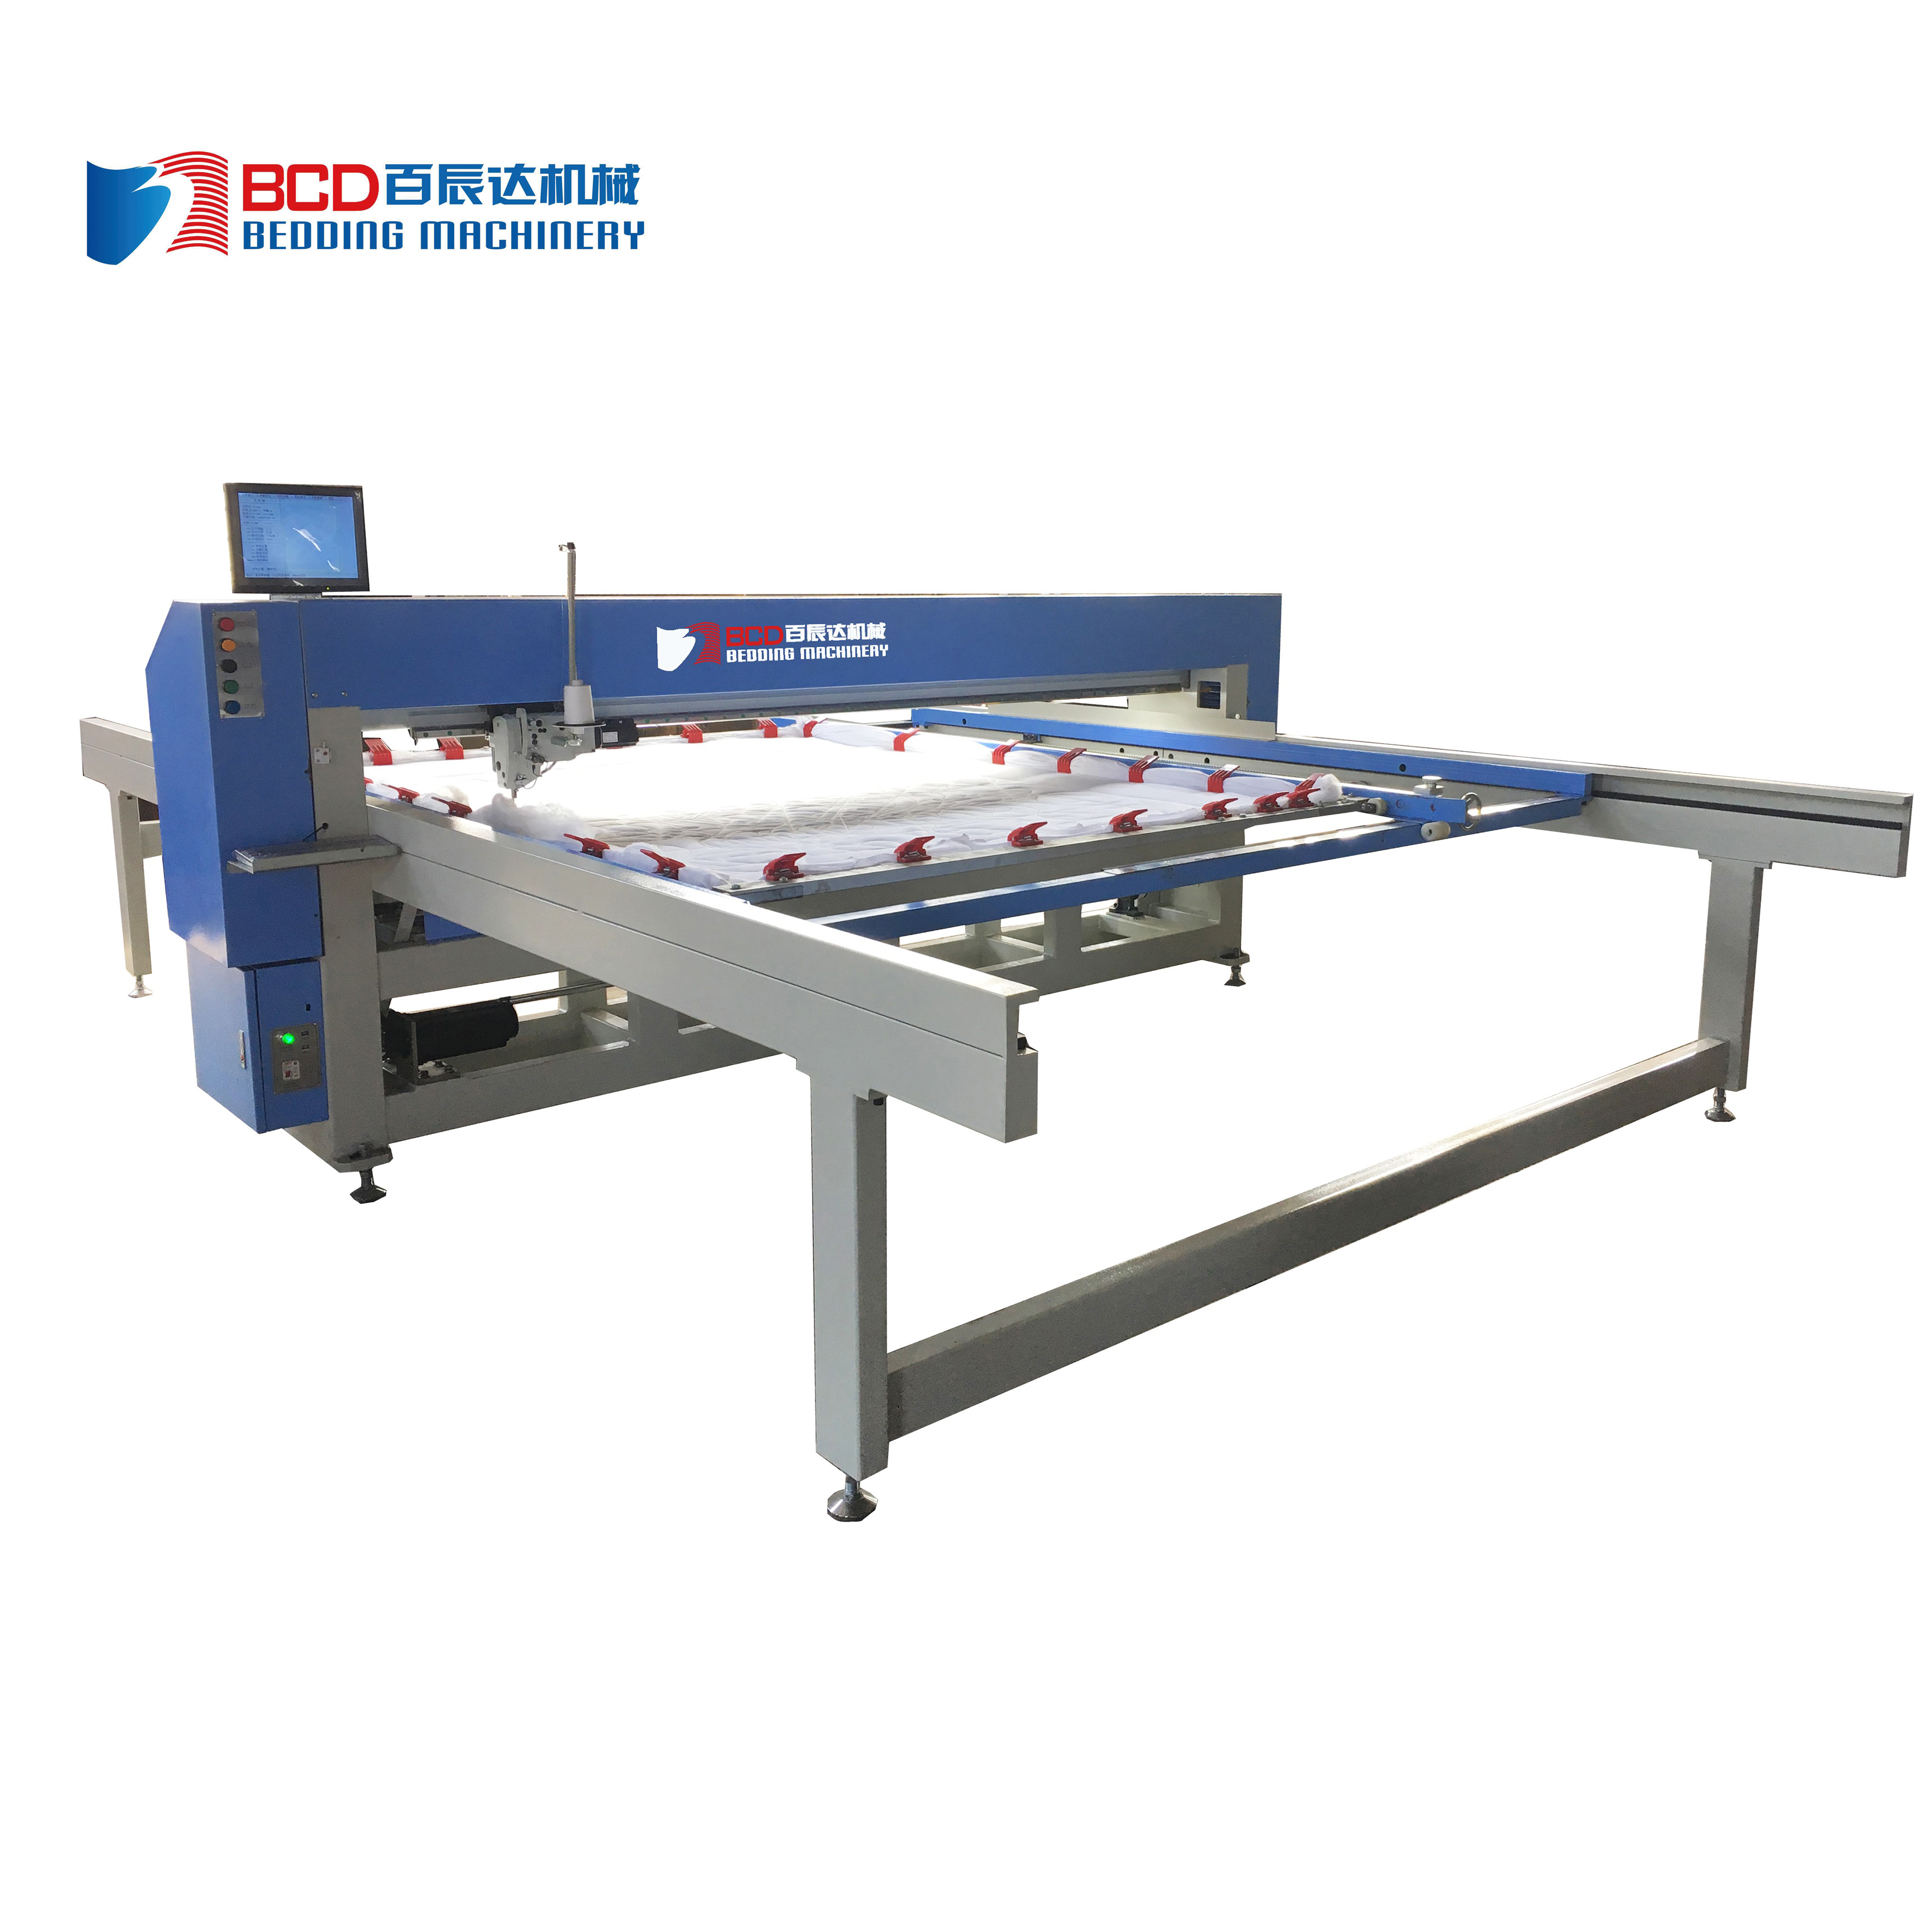 BDZH-3 COMPUTERIZED LONG ARM MOVABLE QUILTER MACHINE